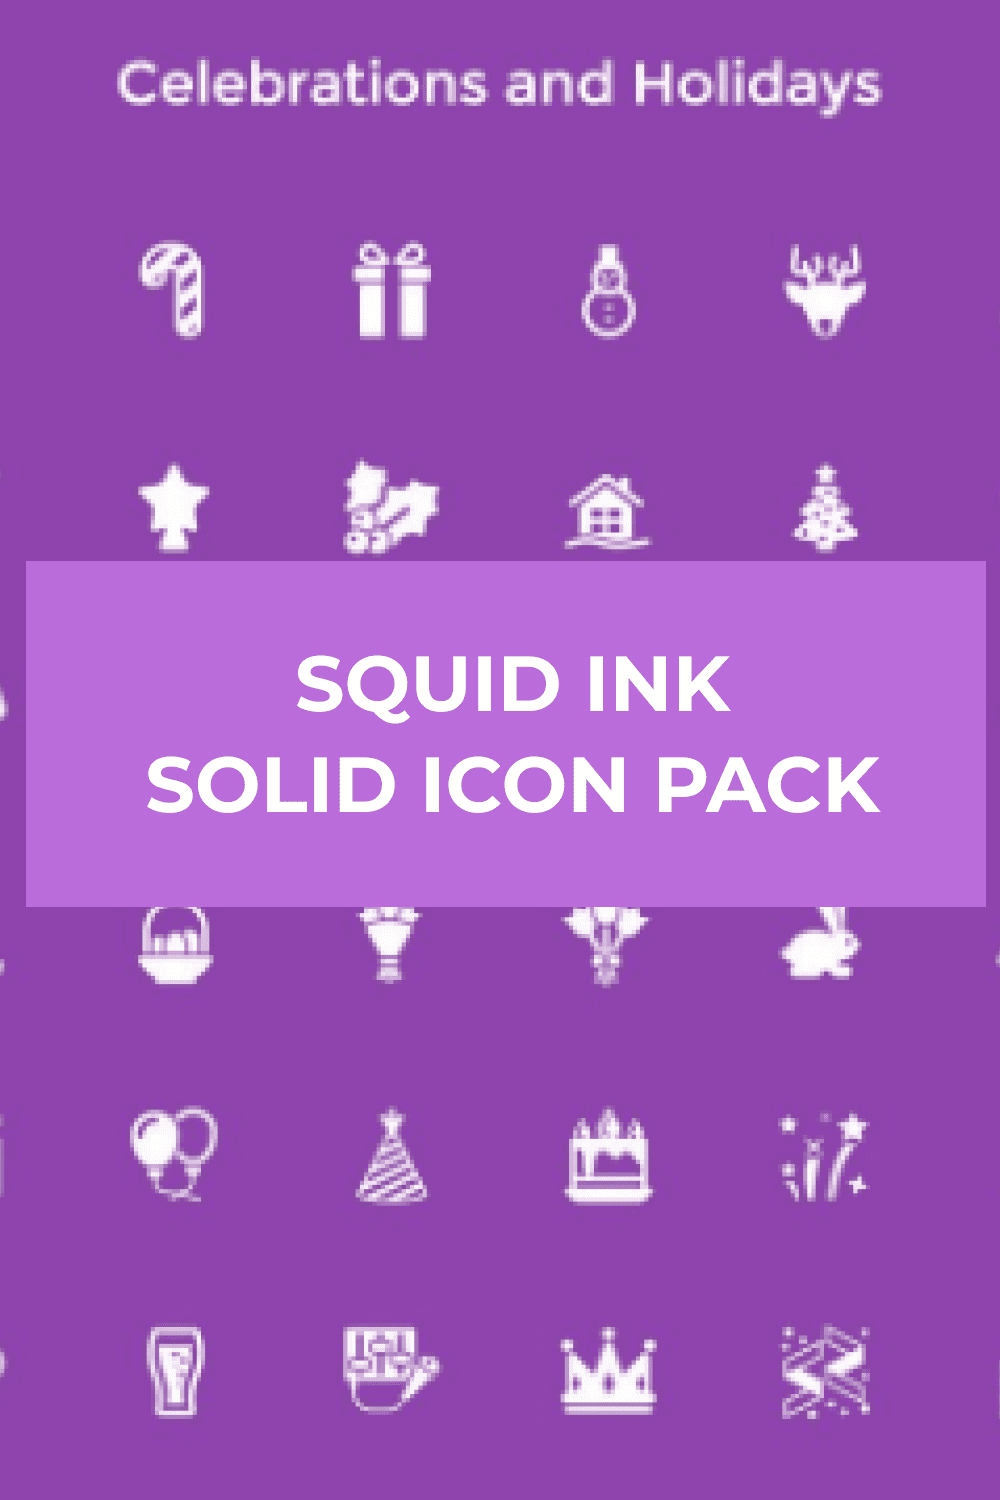 Squid Ink Solid Icon Pack - Pinterest.